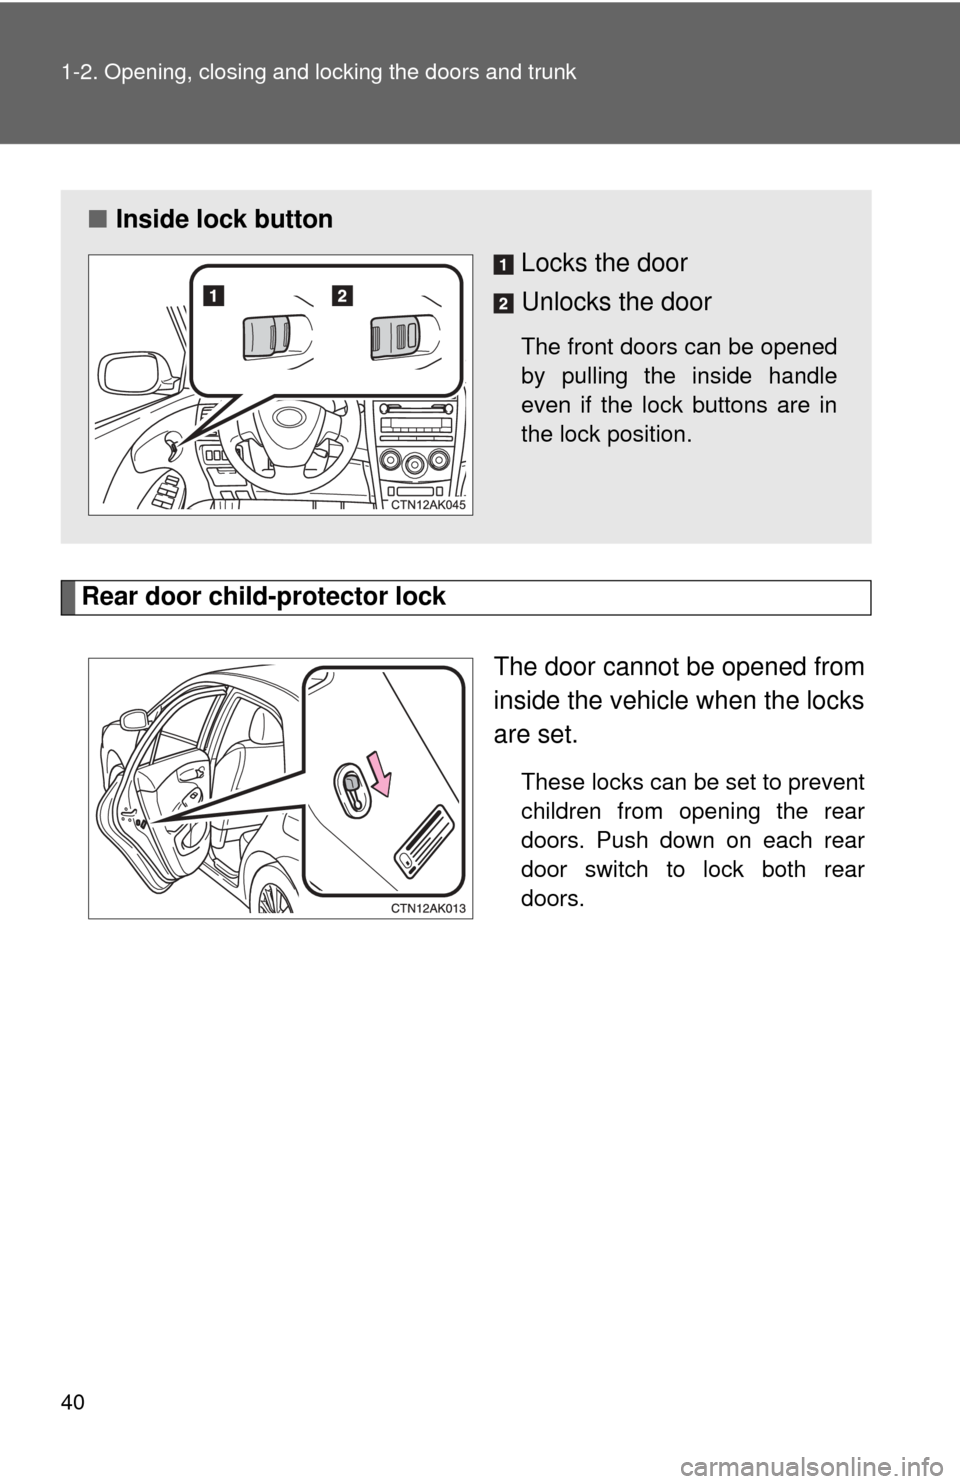 TOYOTA COROLLA 2011 10.G Owners Guide 40 1-2. Opening, closing and locking the doors and trunk
Rear door child-protector lockThe door cannot be opened from
inside the vehicle when the locks
are set. 
These locks can be set to prevent
chil